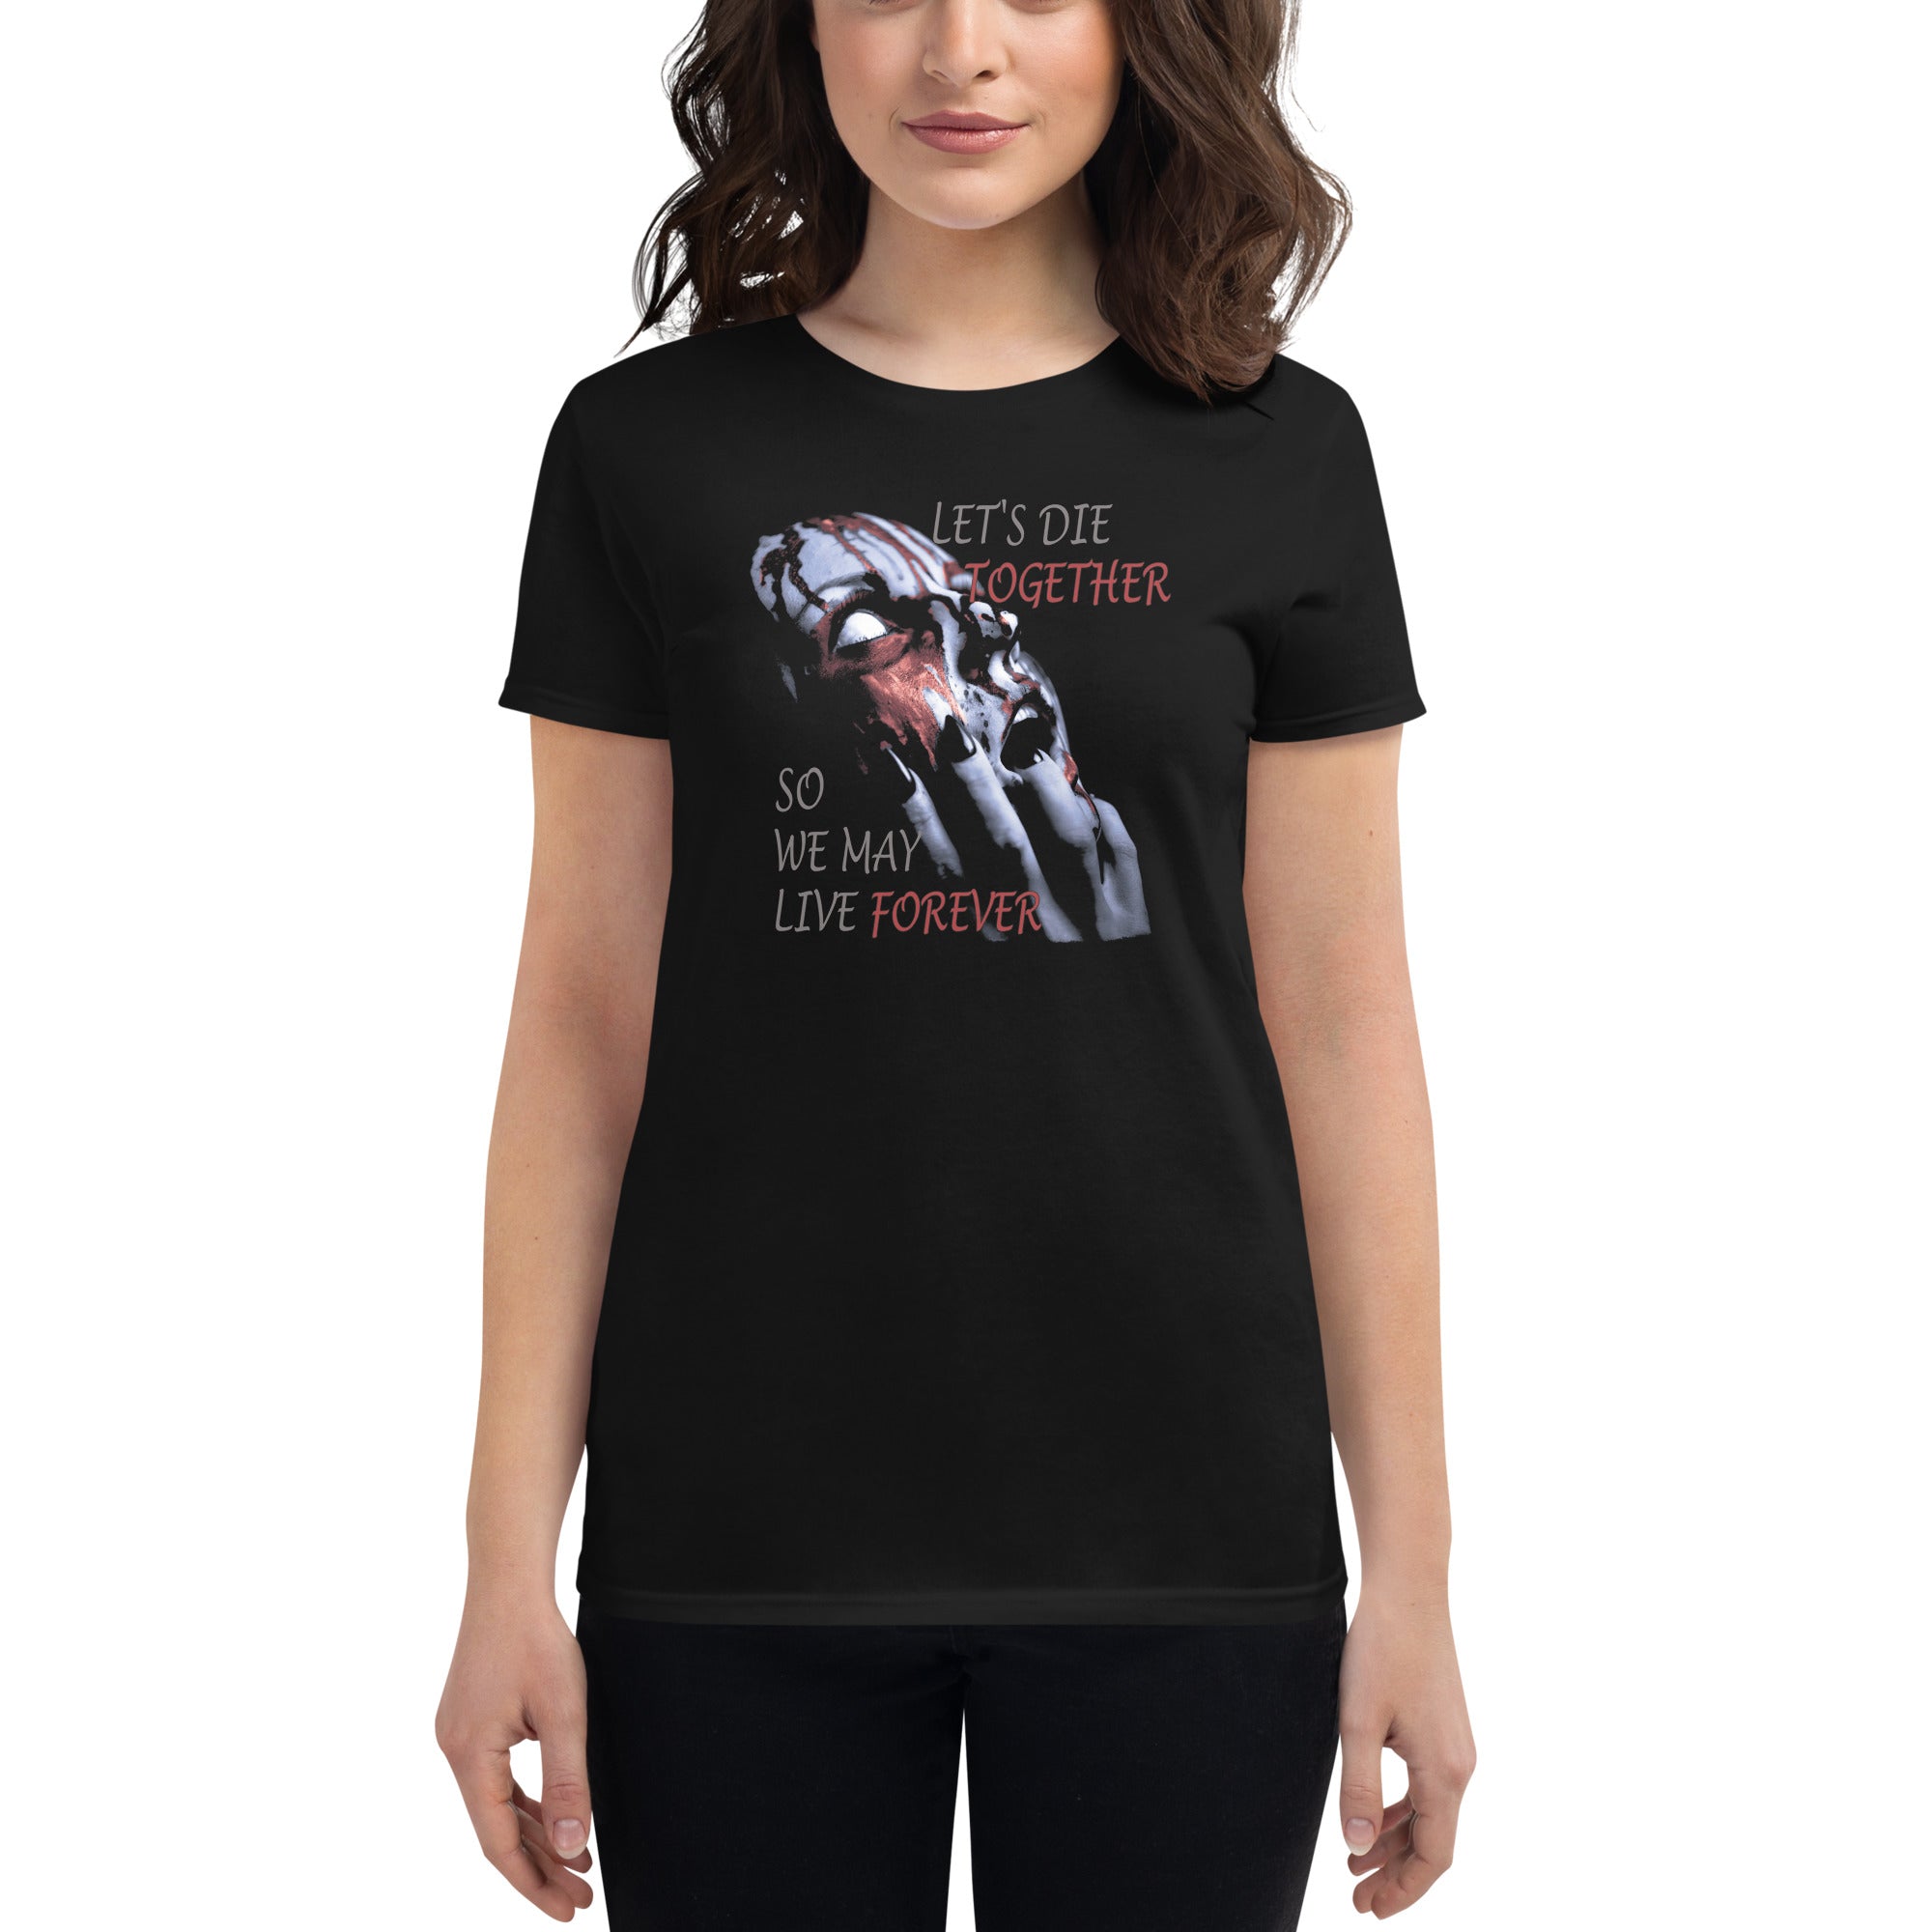 Together Forever Horror Gothic Fashion Women's Short Sleeve Babydoll T-shirt